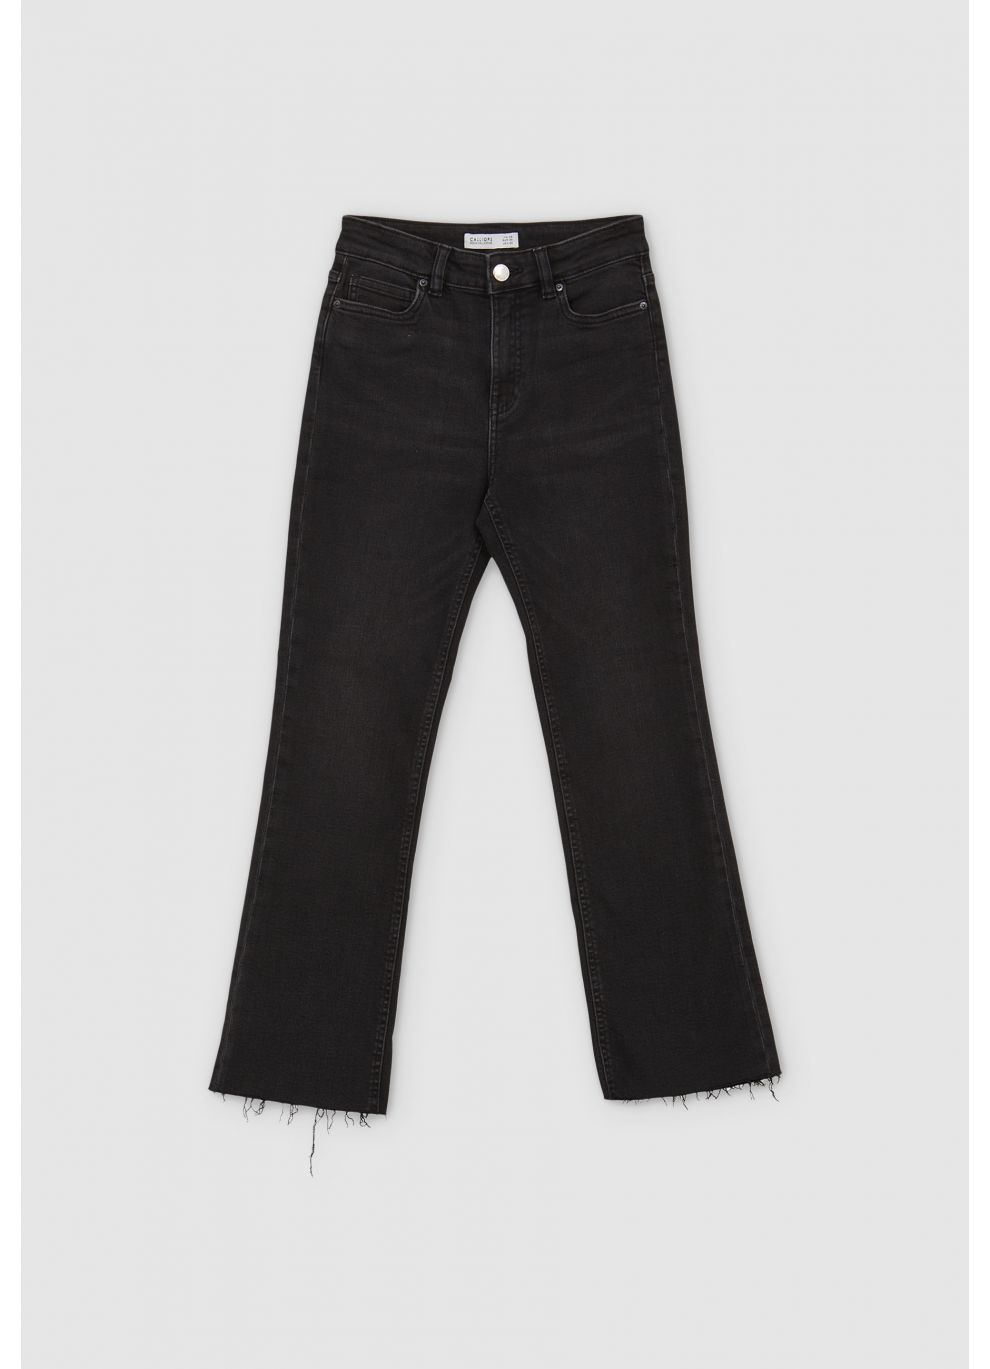 Calliope > Jeans - Flare and Trumpet Femme online